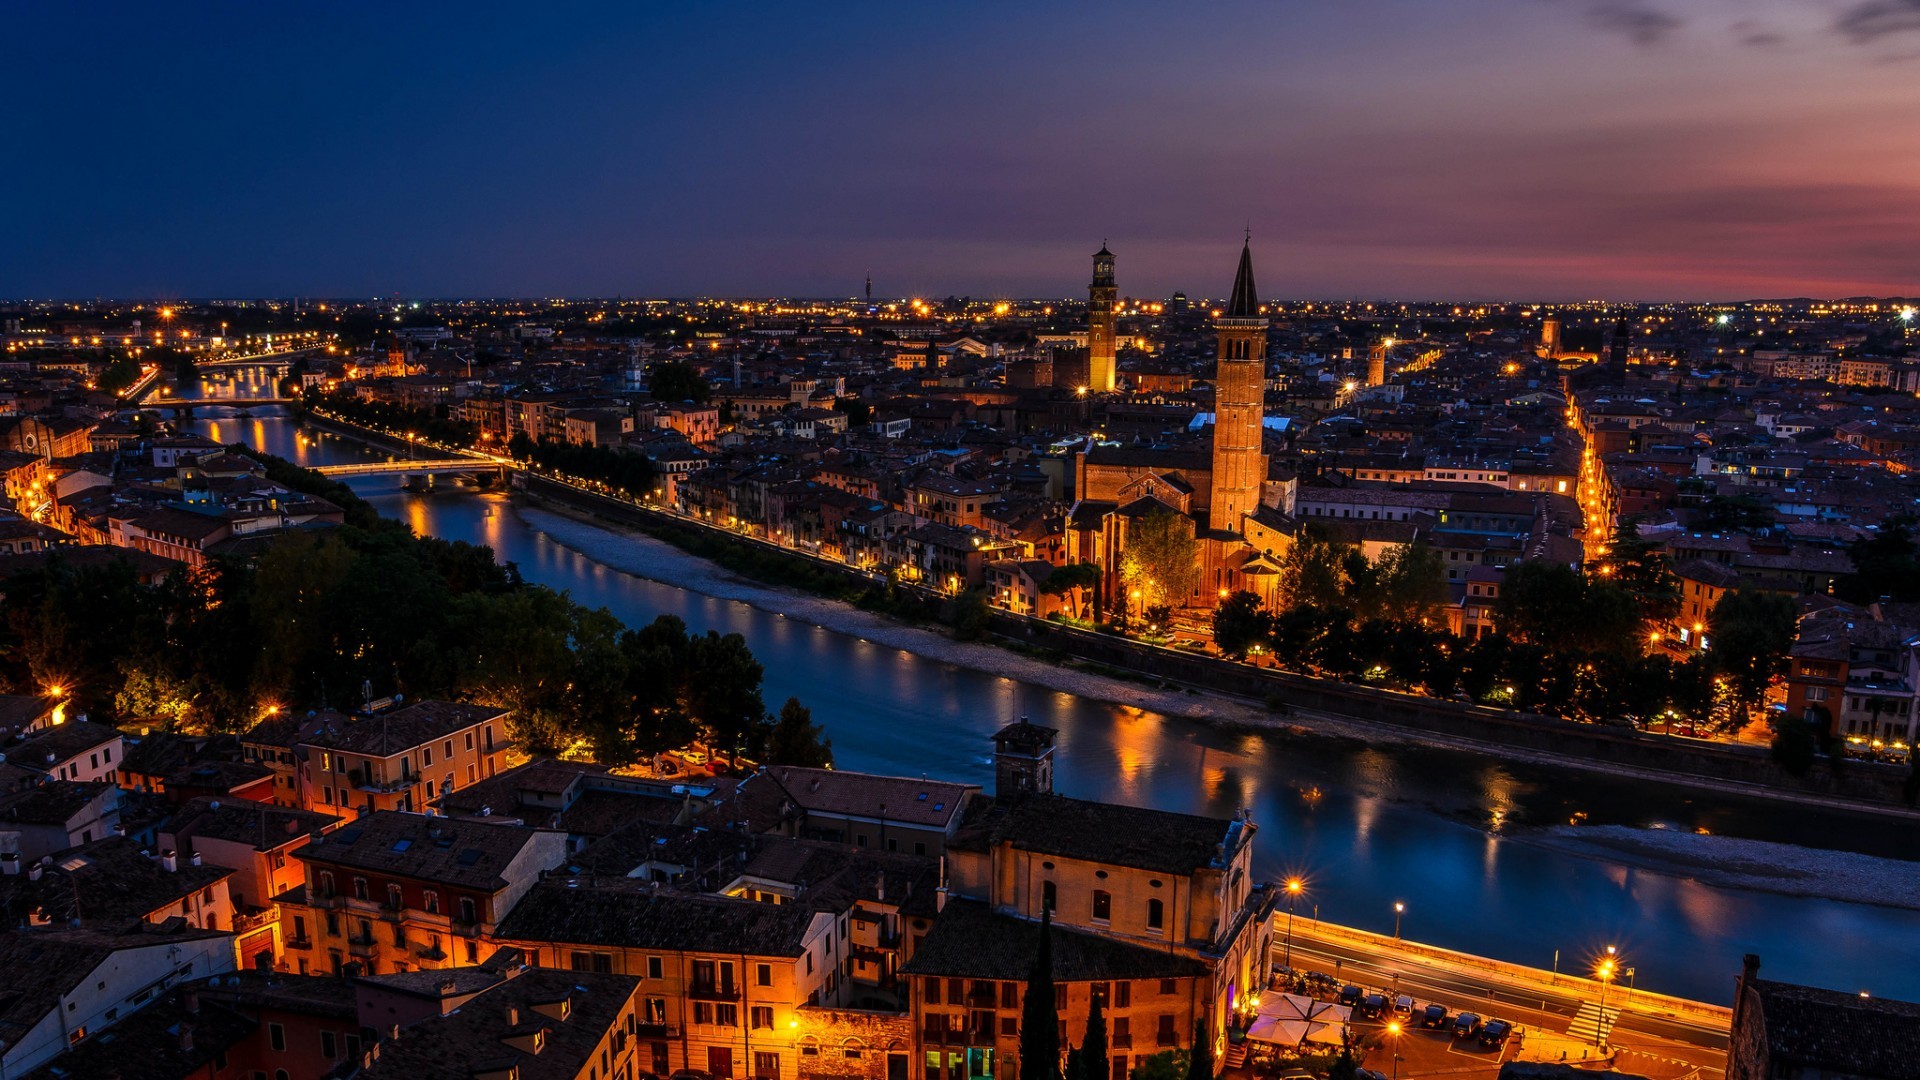 architecture, City, Cityscape, Night, Lights, Building, Verona, Italy, River, Old building, Bridge, Ancient, Church, Tower, Clouds, Reflection, Trees, Rooftops, Street Wallpaper